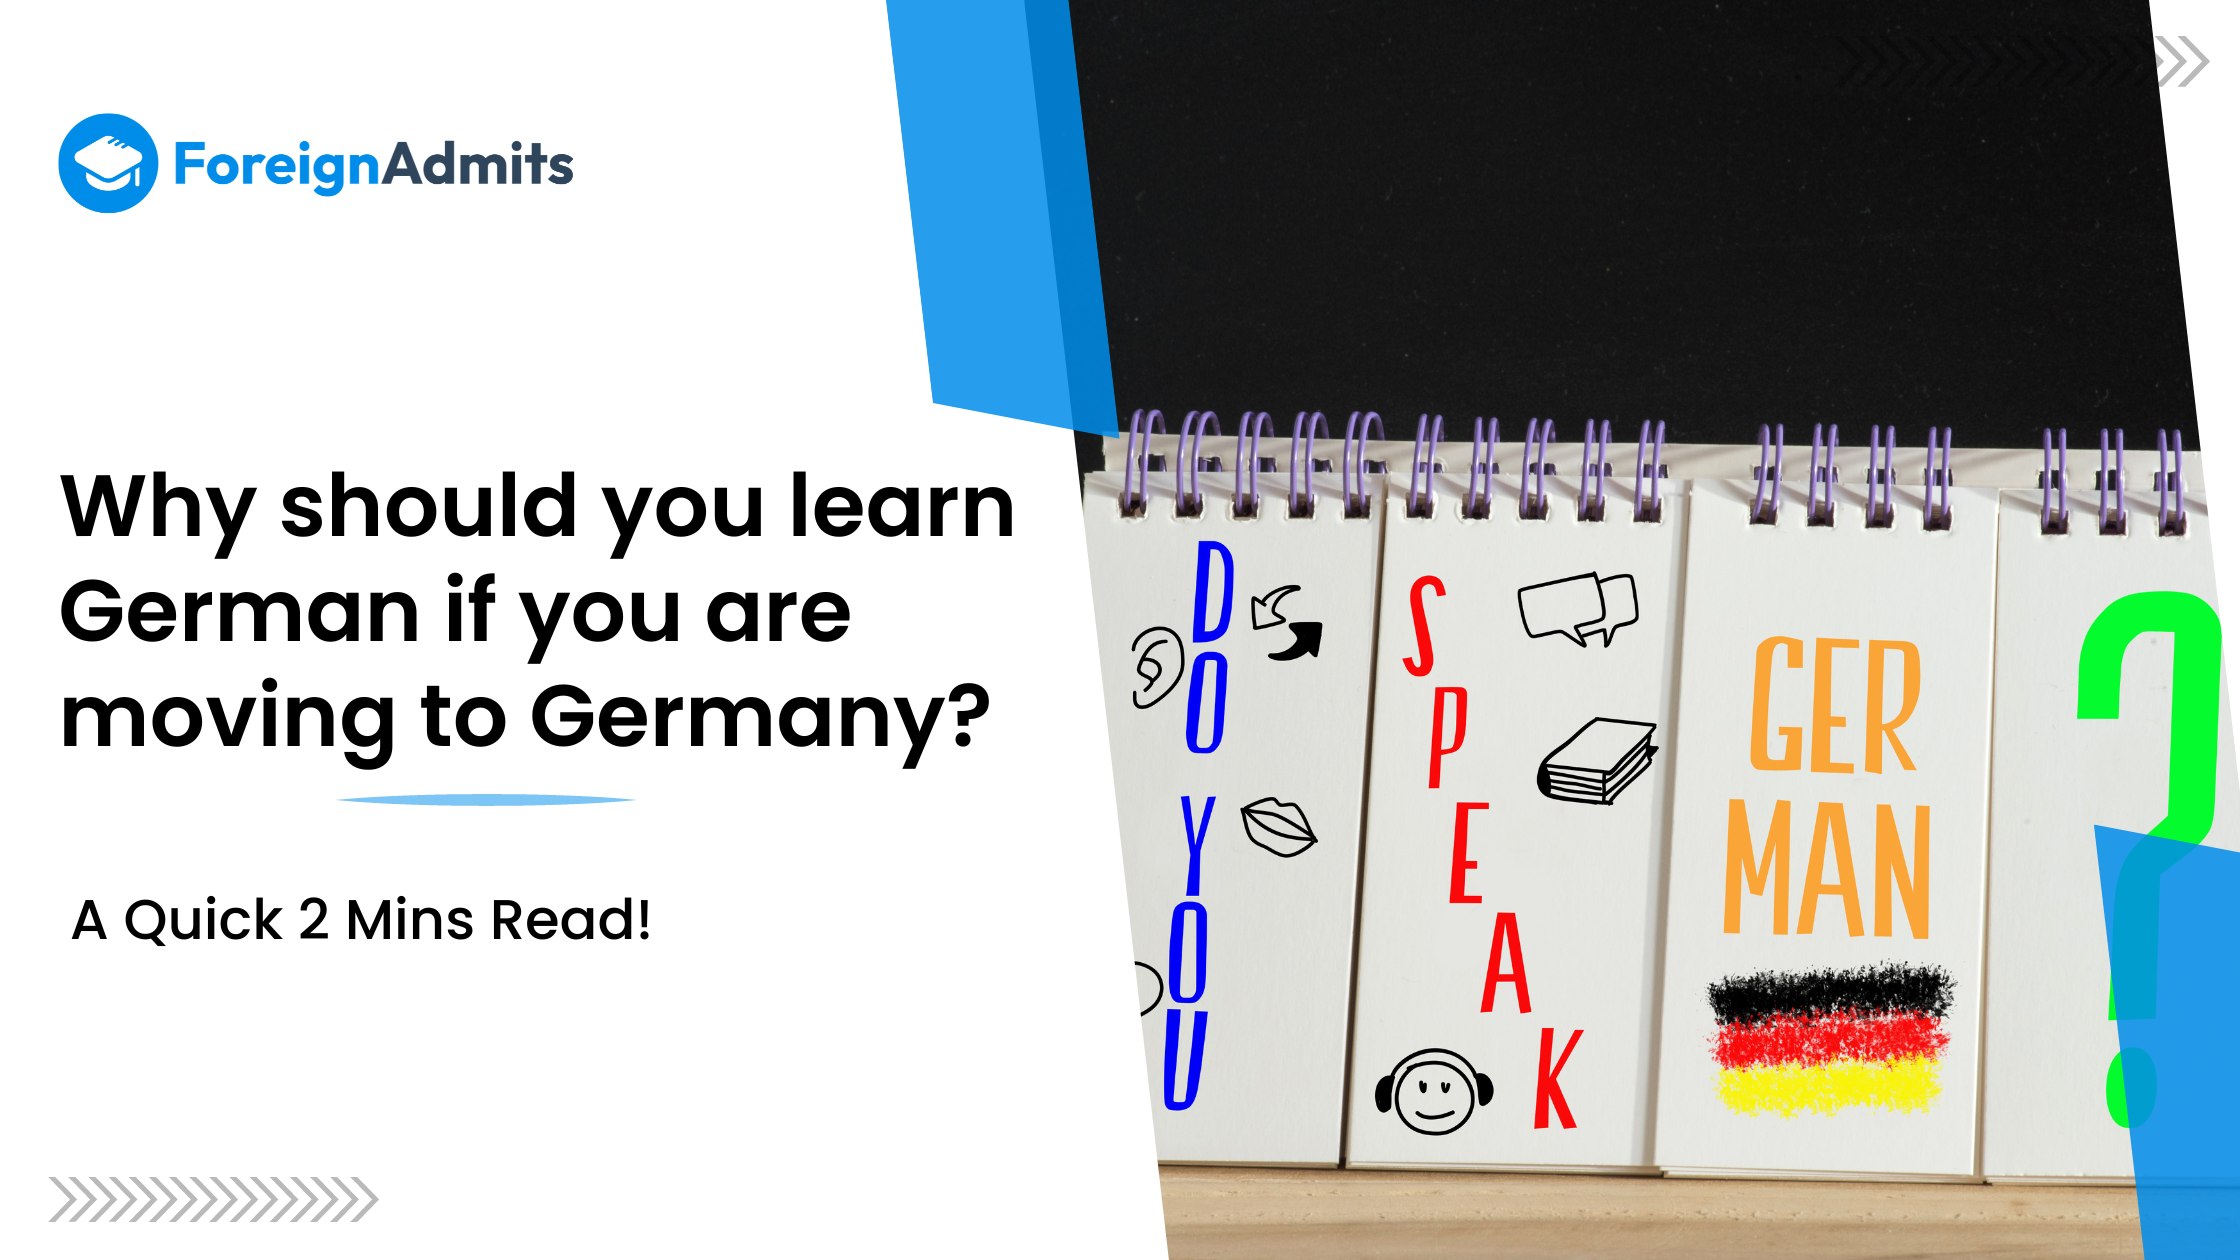 Why should you learn German if you are moving to Germany? A Quick 2 Min Read